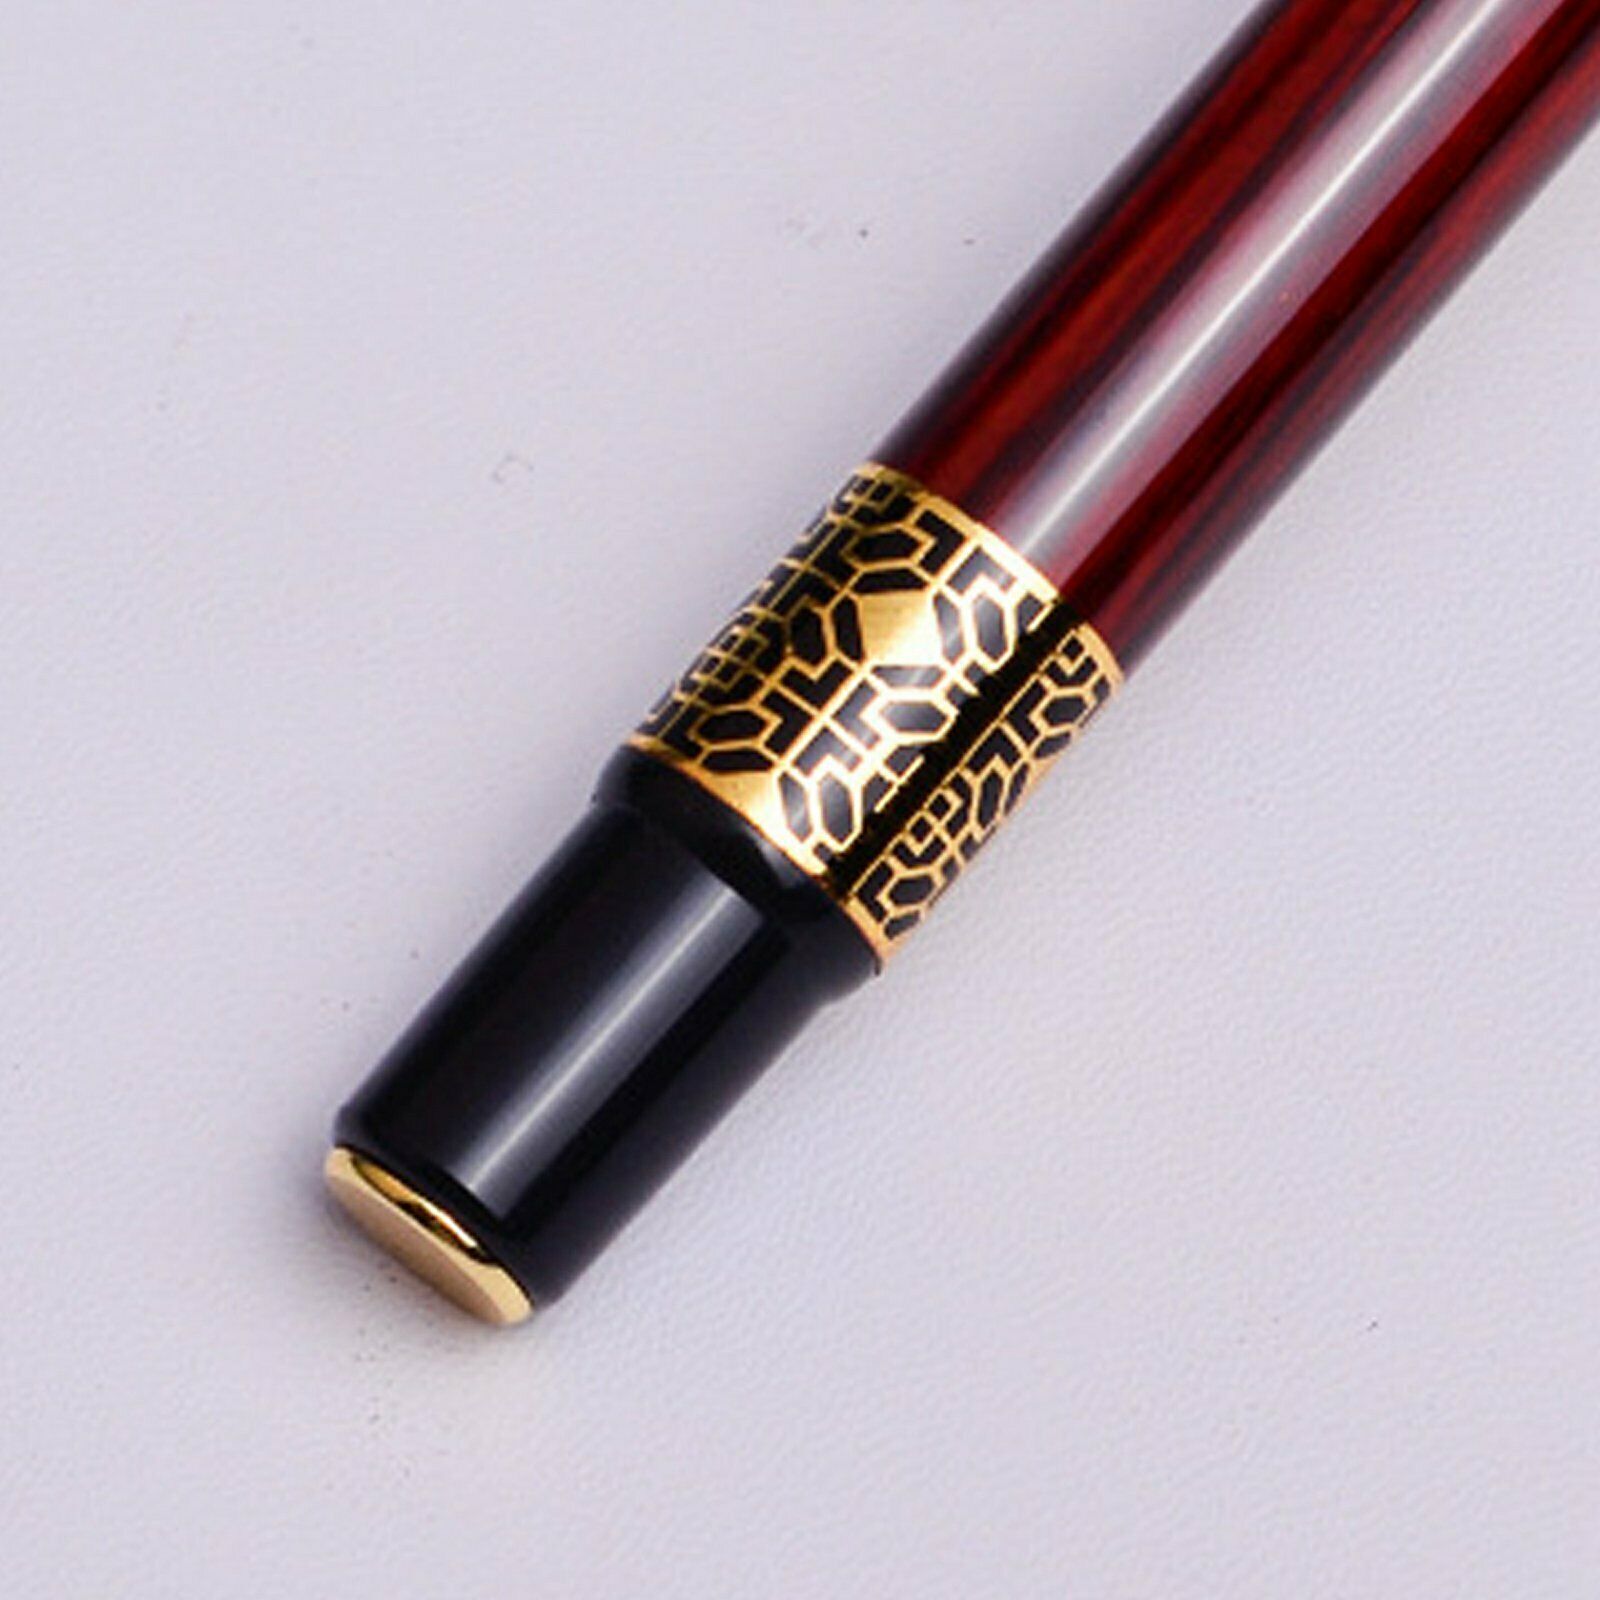 Metal Ink-Refill Fountain Pen Stationery Business Writing Gift Box Calligraphy